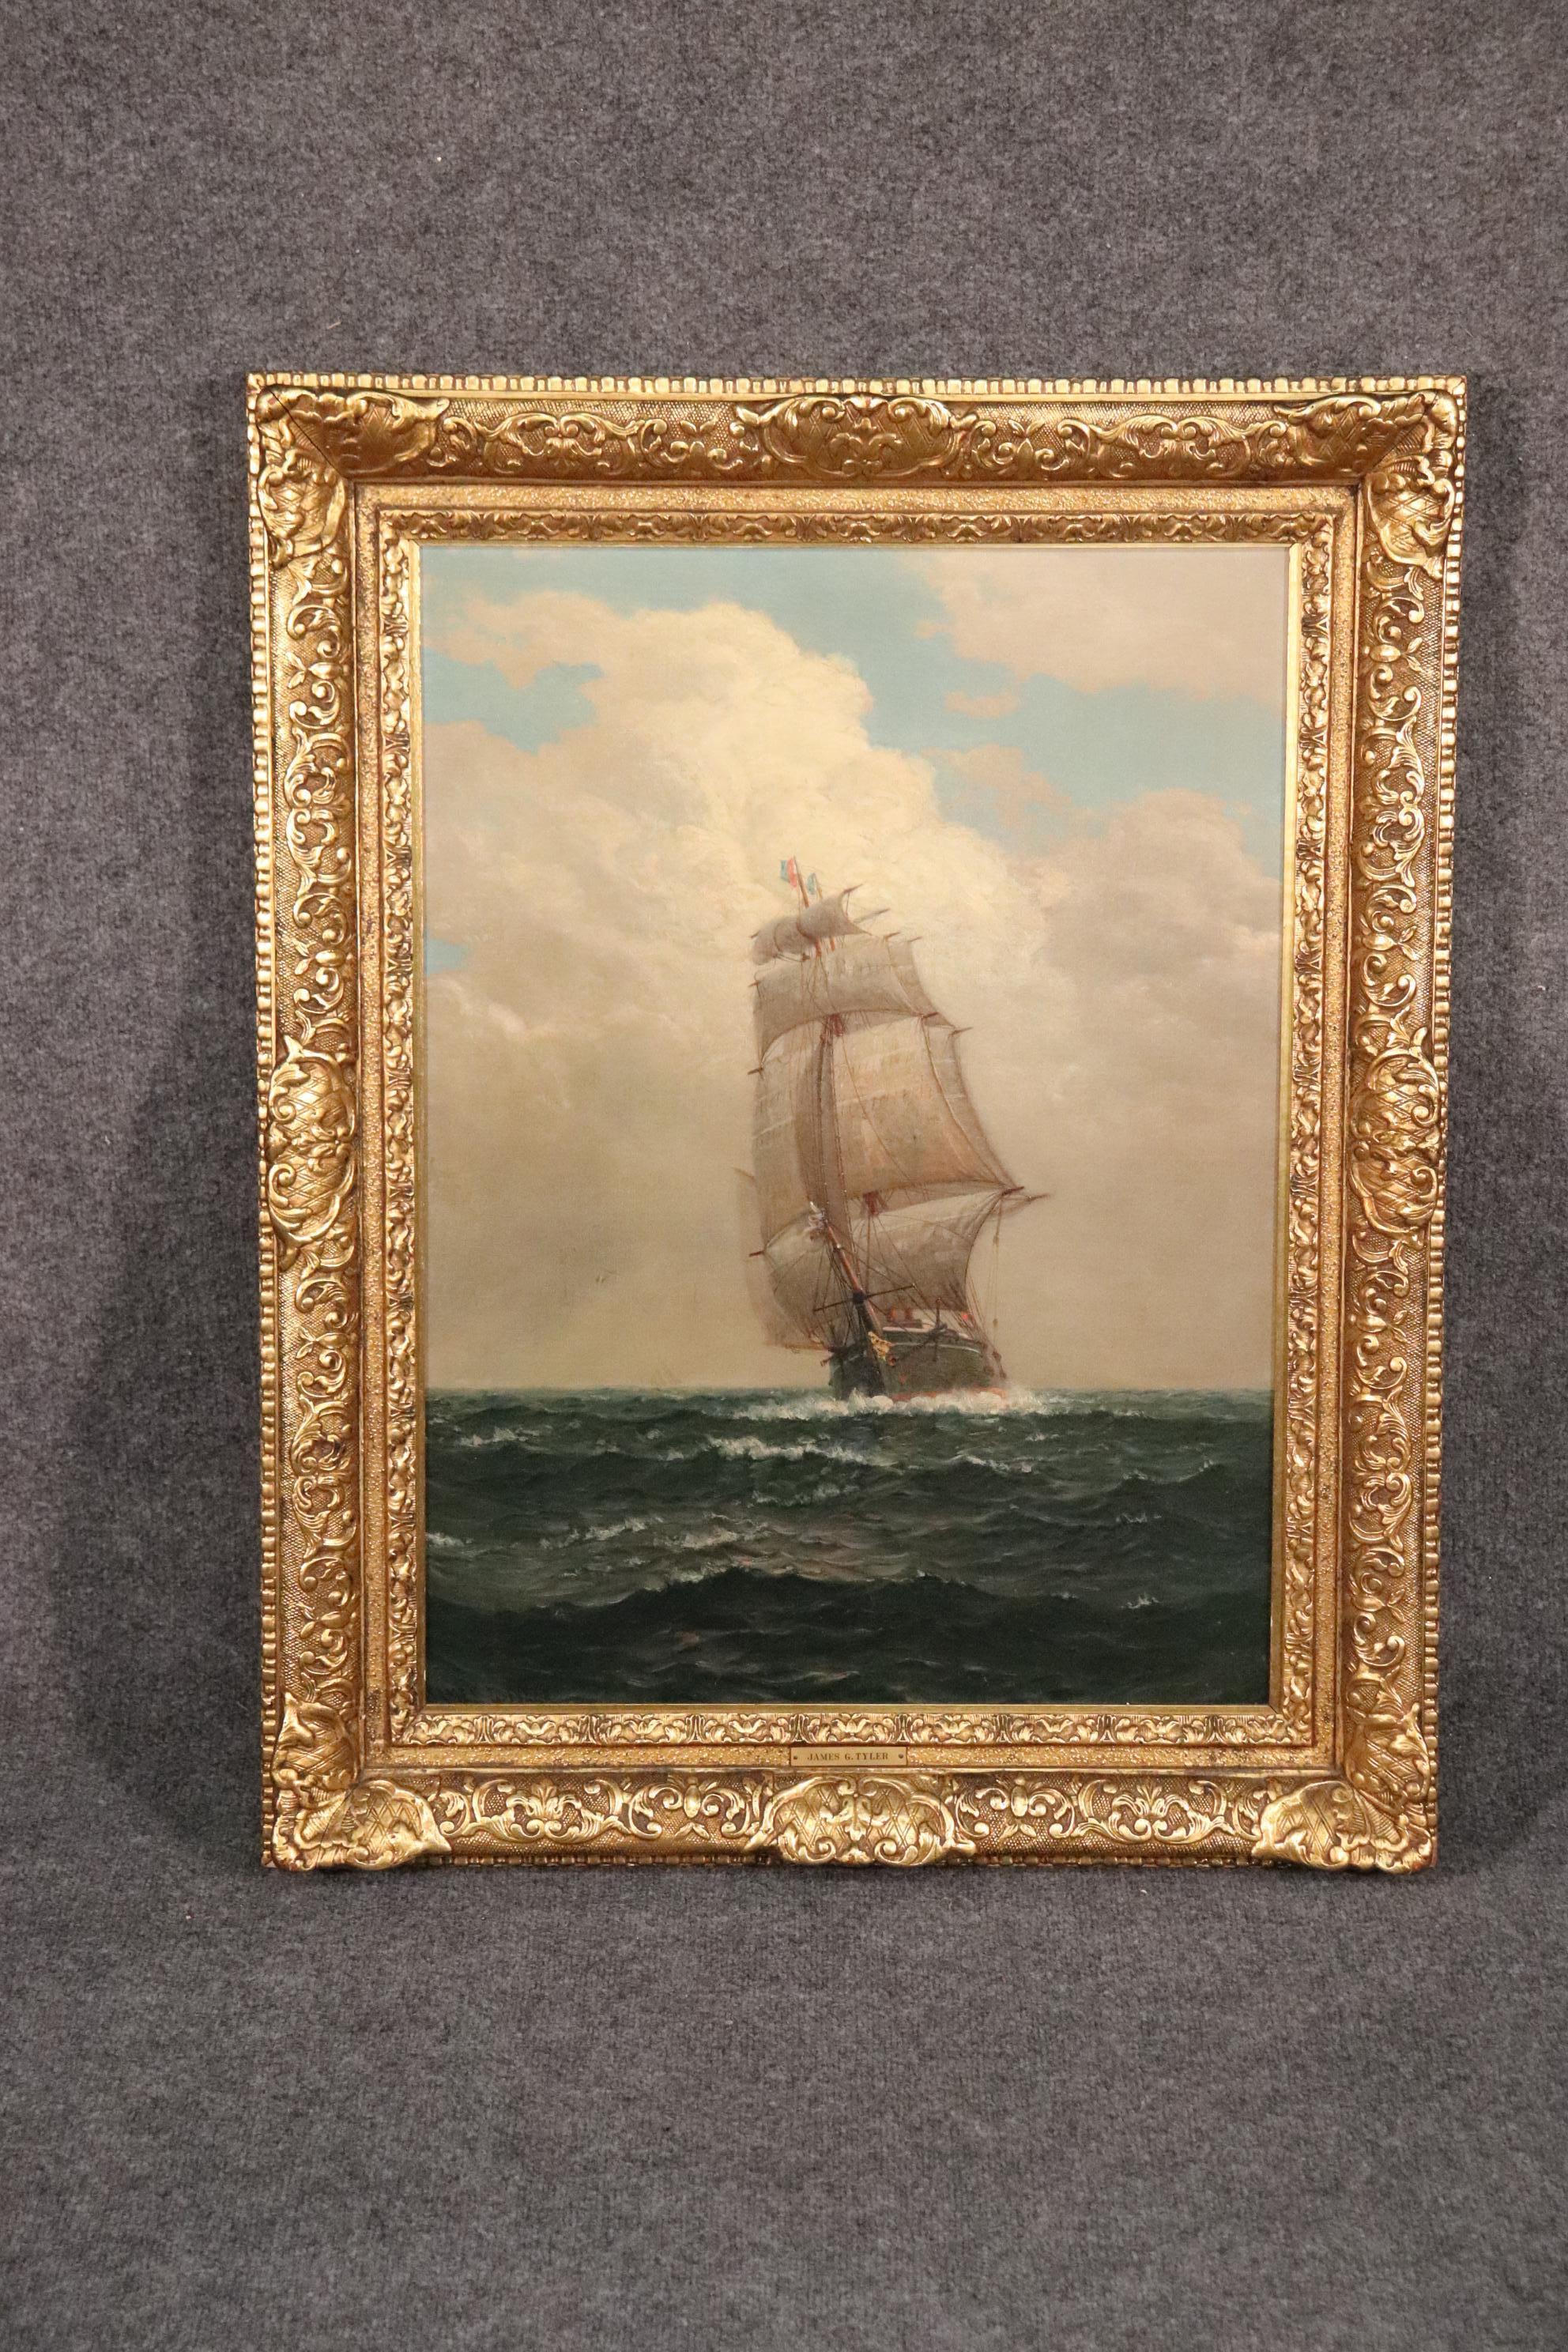 This is a superb quality painting of a tall sailing ship by James G. Tyler. This 19th century painting is masterfully done by the artist and the frame really adds to the quality of the painting as well. This is an investment grade painting to build